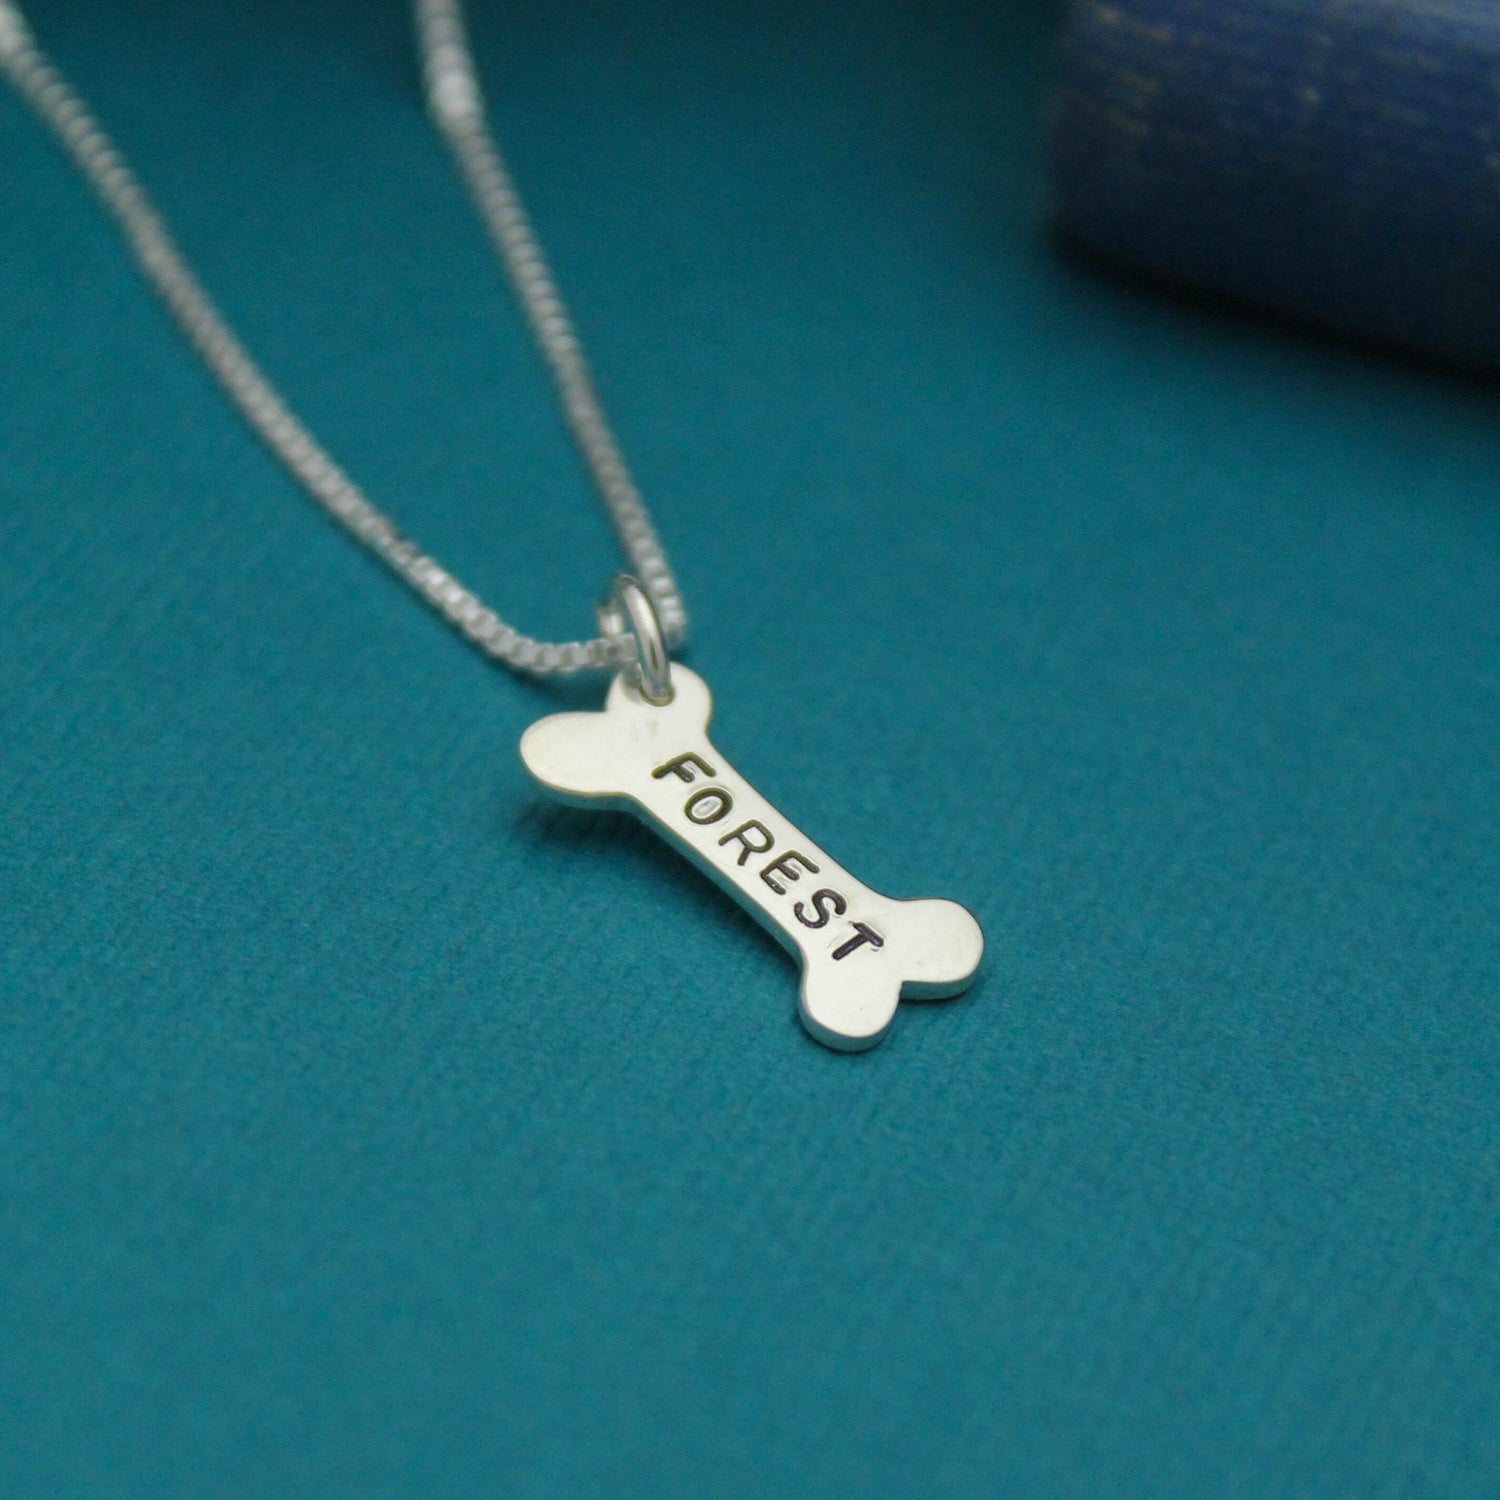 Personalized Dog Bone Necklace, Dog Lover Gift, Bone Necklace, Gifts for Dog Lovers, Gifts for Her, Hand Stamped Personalized Necklace